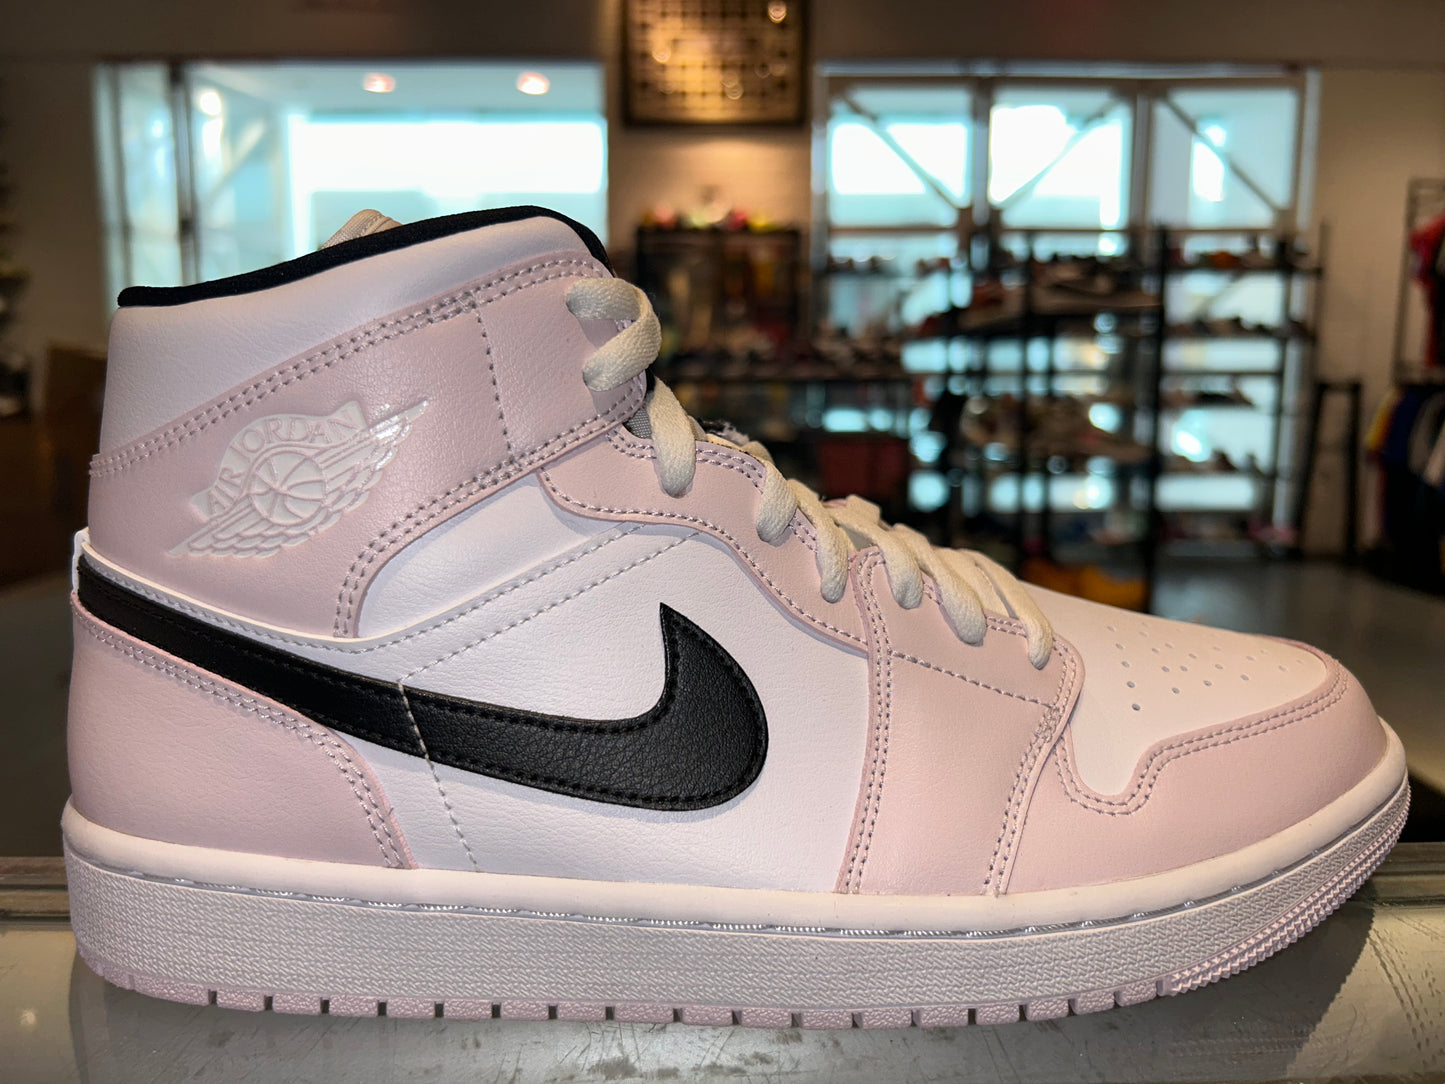 Size 10.5 (12W) Air Jordan 1 Mid “Barely Rose” Brand New (Mall)